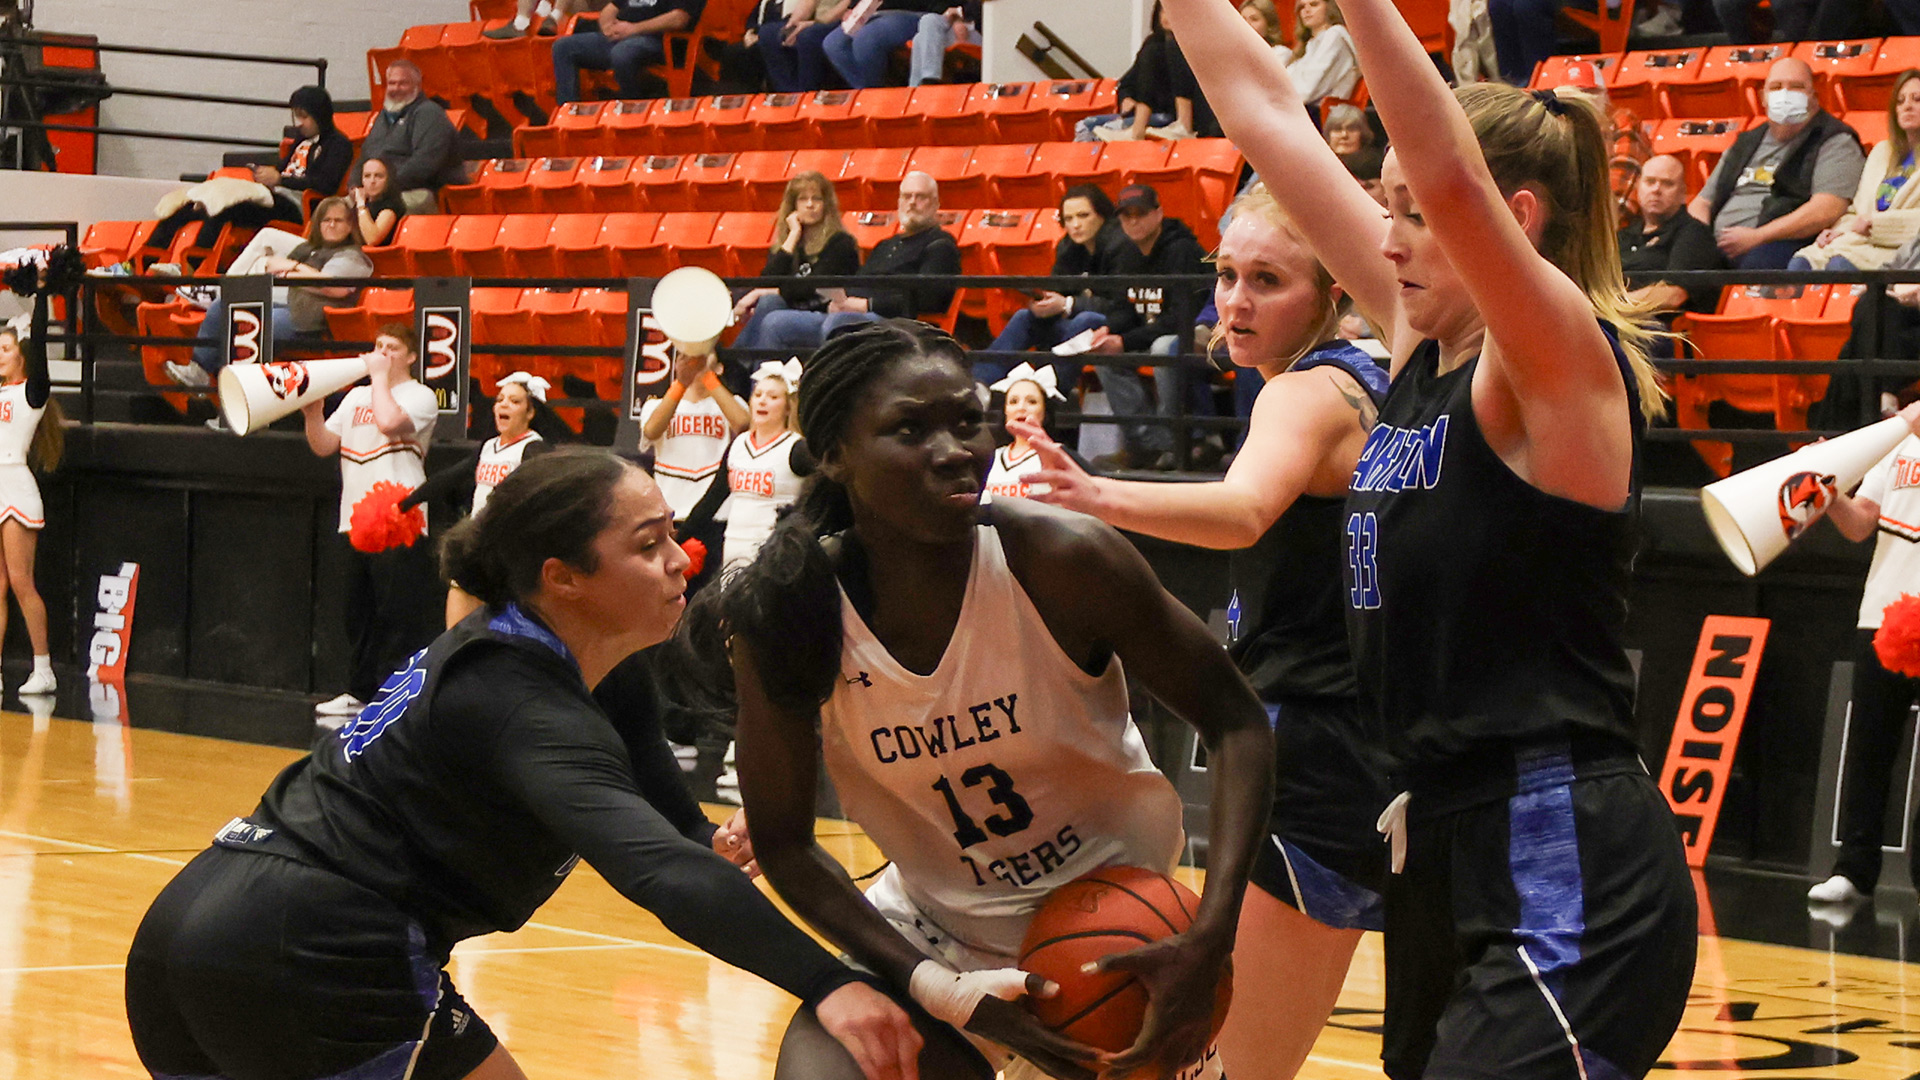 Mbengue, Komor help lead Cowley to a 78-65 upset win over Dodge City